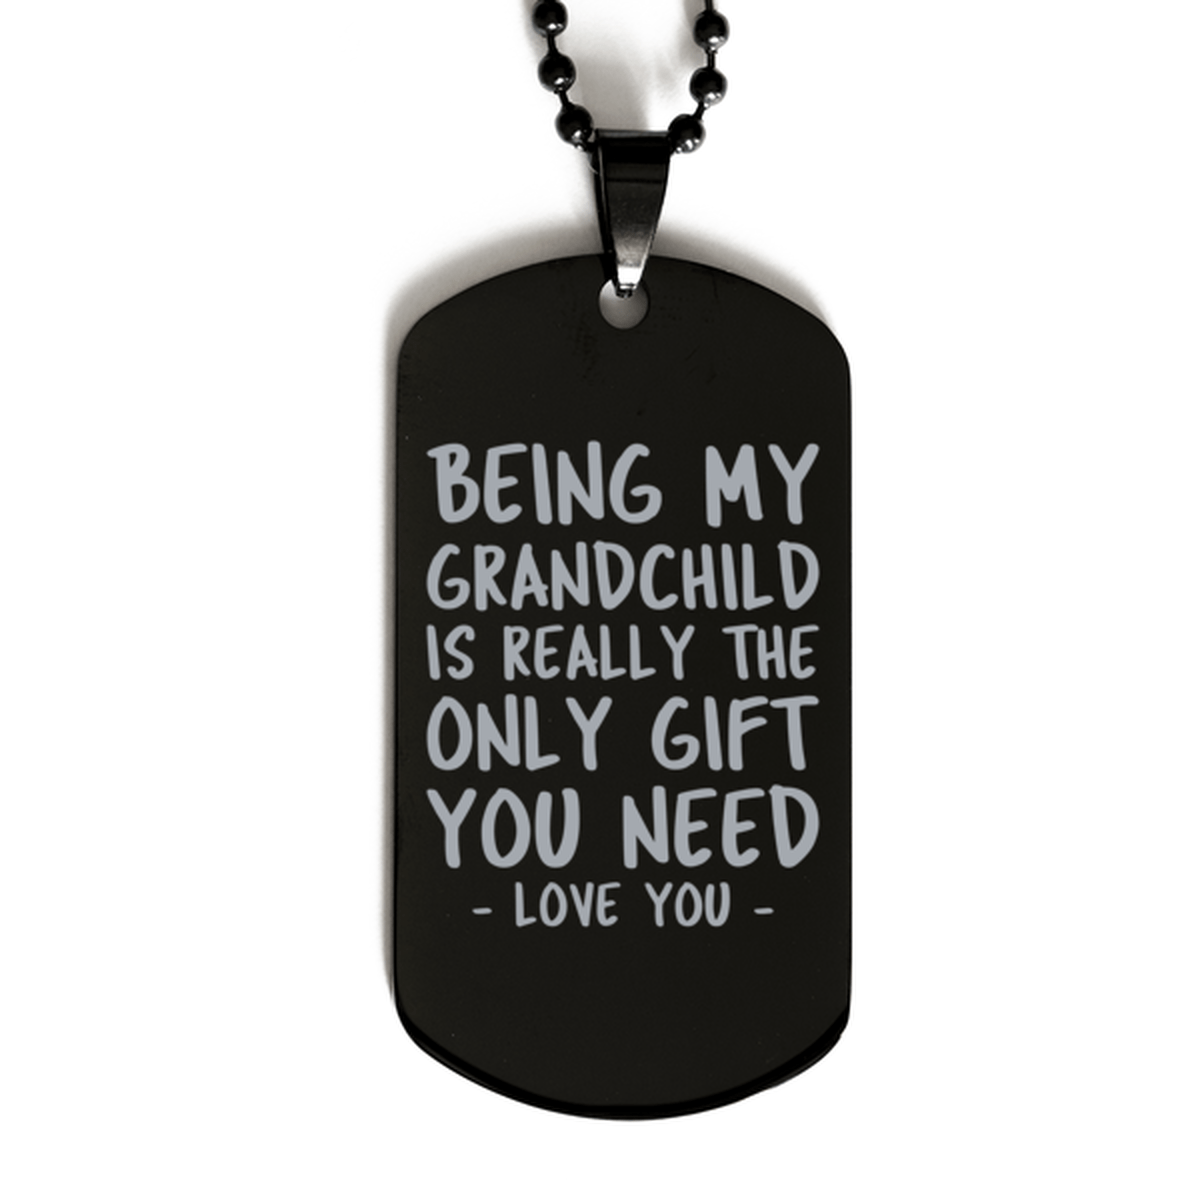 Funny Grandchild Black Dog Tag Necklace, Being My Grandchild Is Really the Only Gift You Need, Best Birthday Gifts for Grandchild